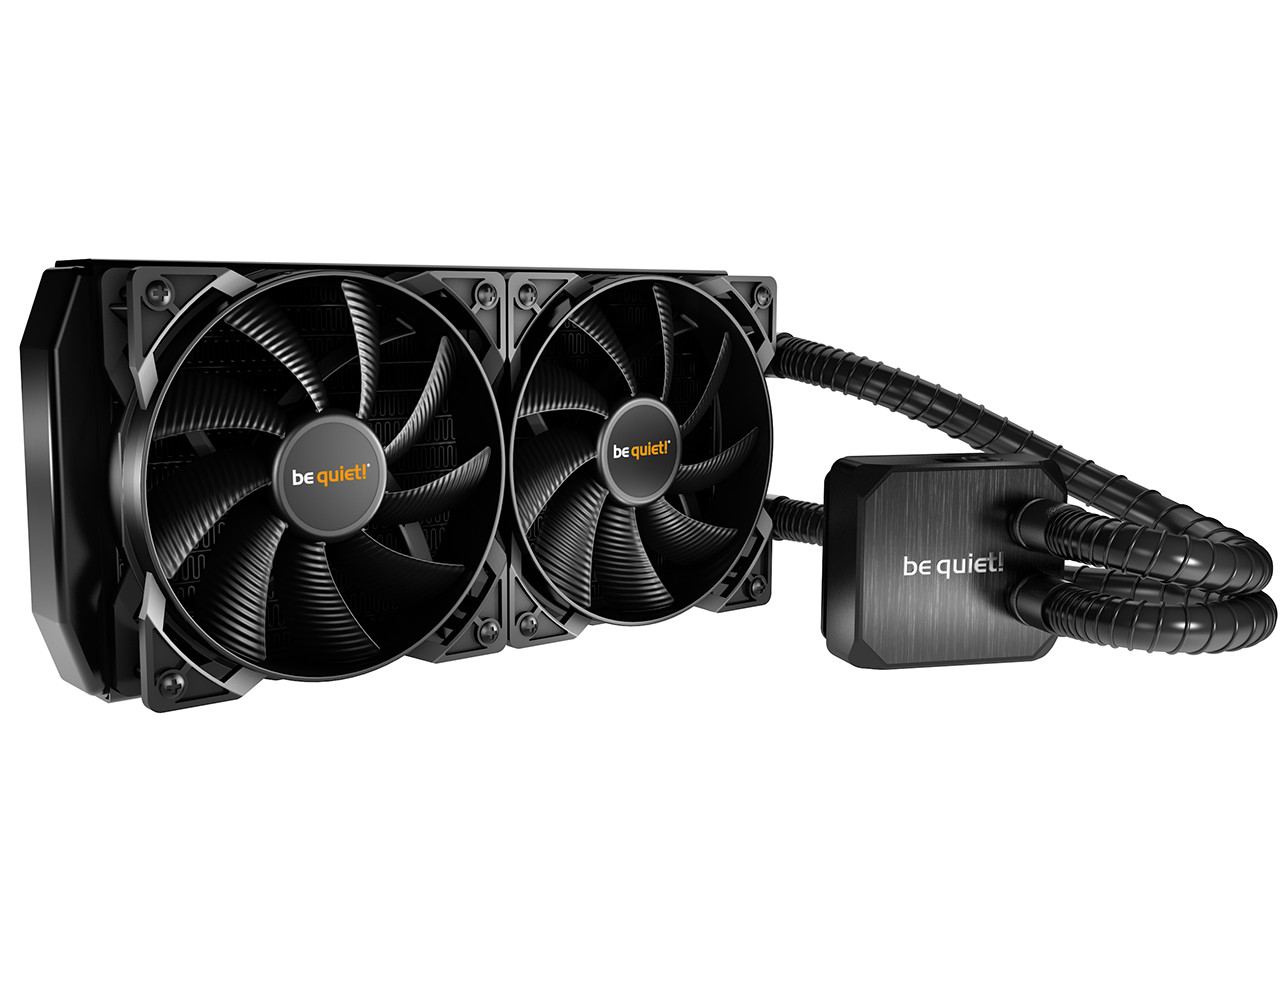 Be Quiet! Introduces the Loop Series AIO Liquid Coolers TechPowerUp